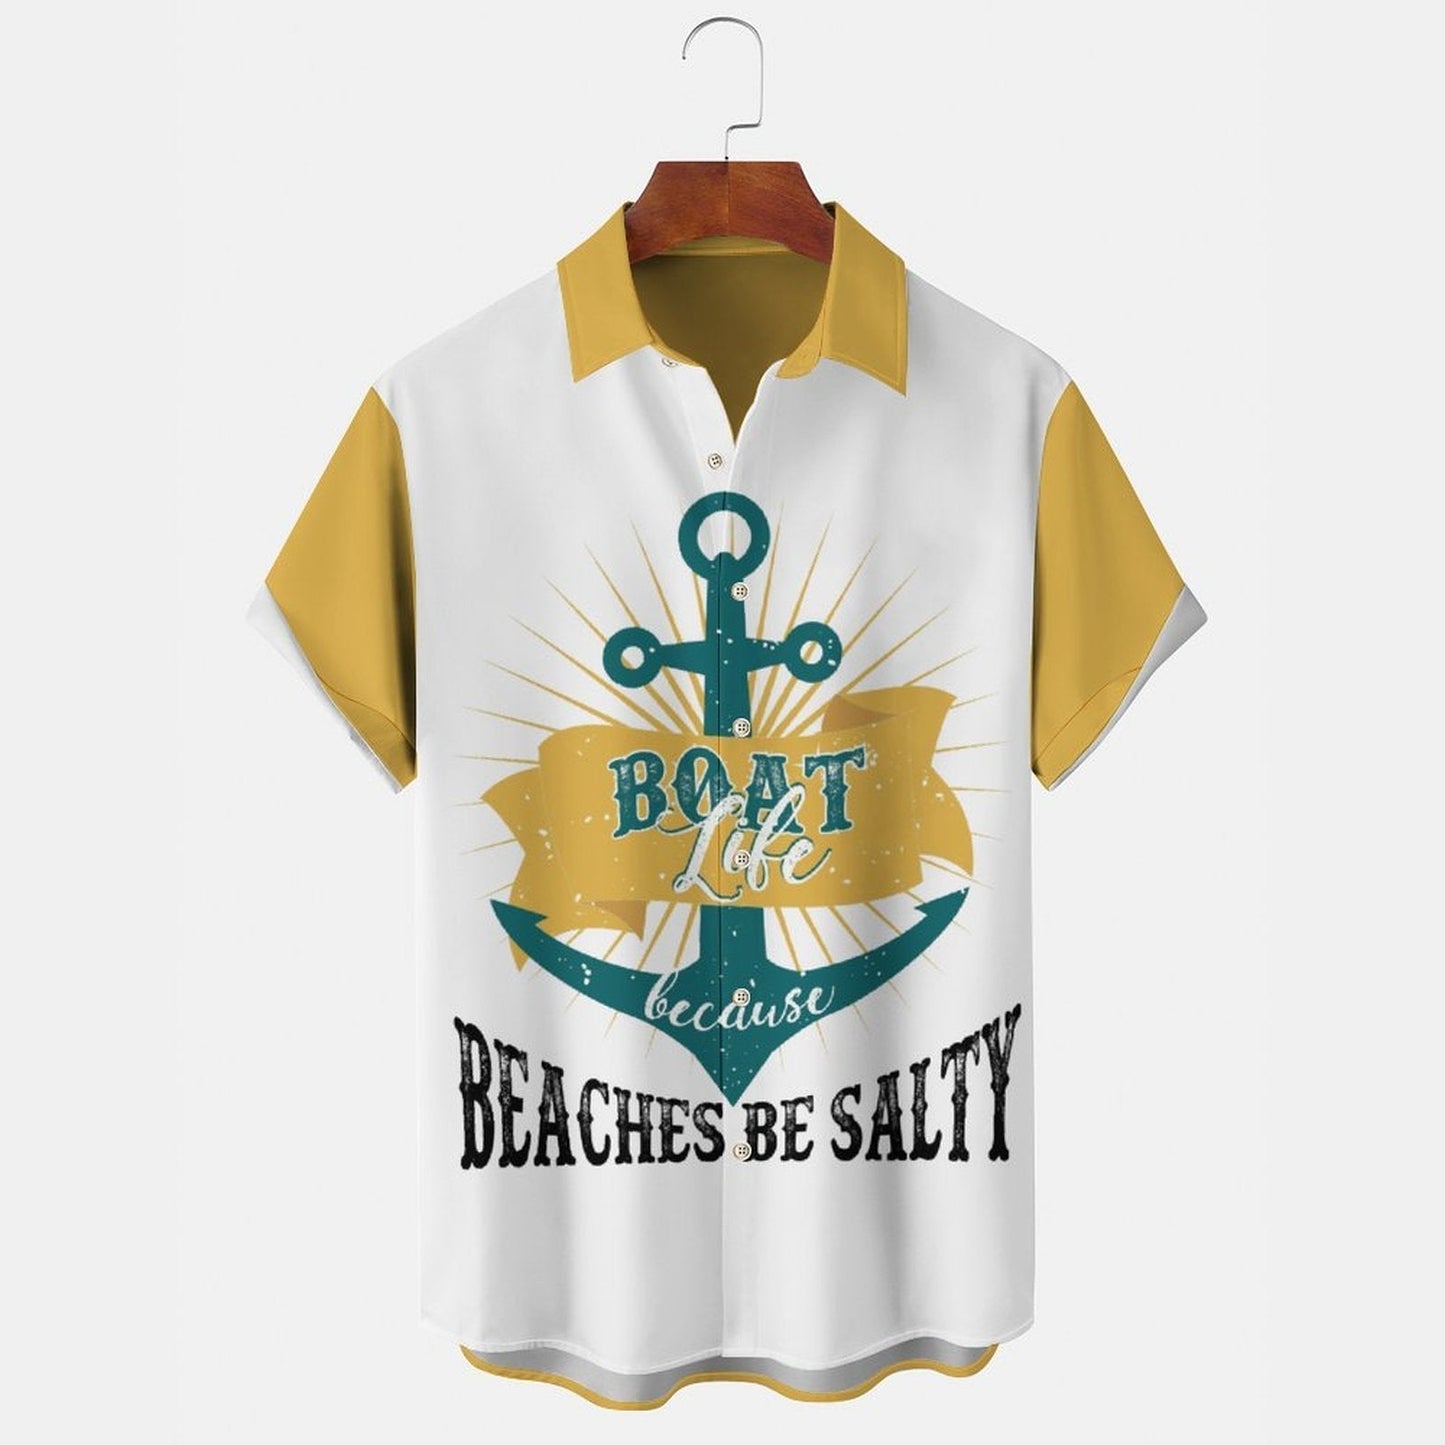 BEACHES BE SALTY Men's Casual Stand Collar Soft & Breathable Short Sleeve Shirt